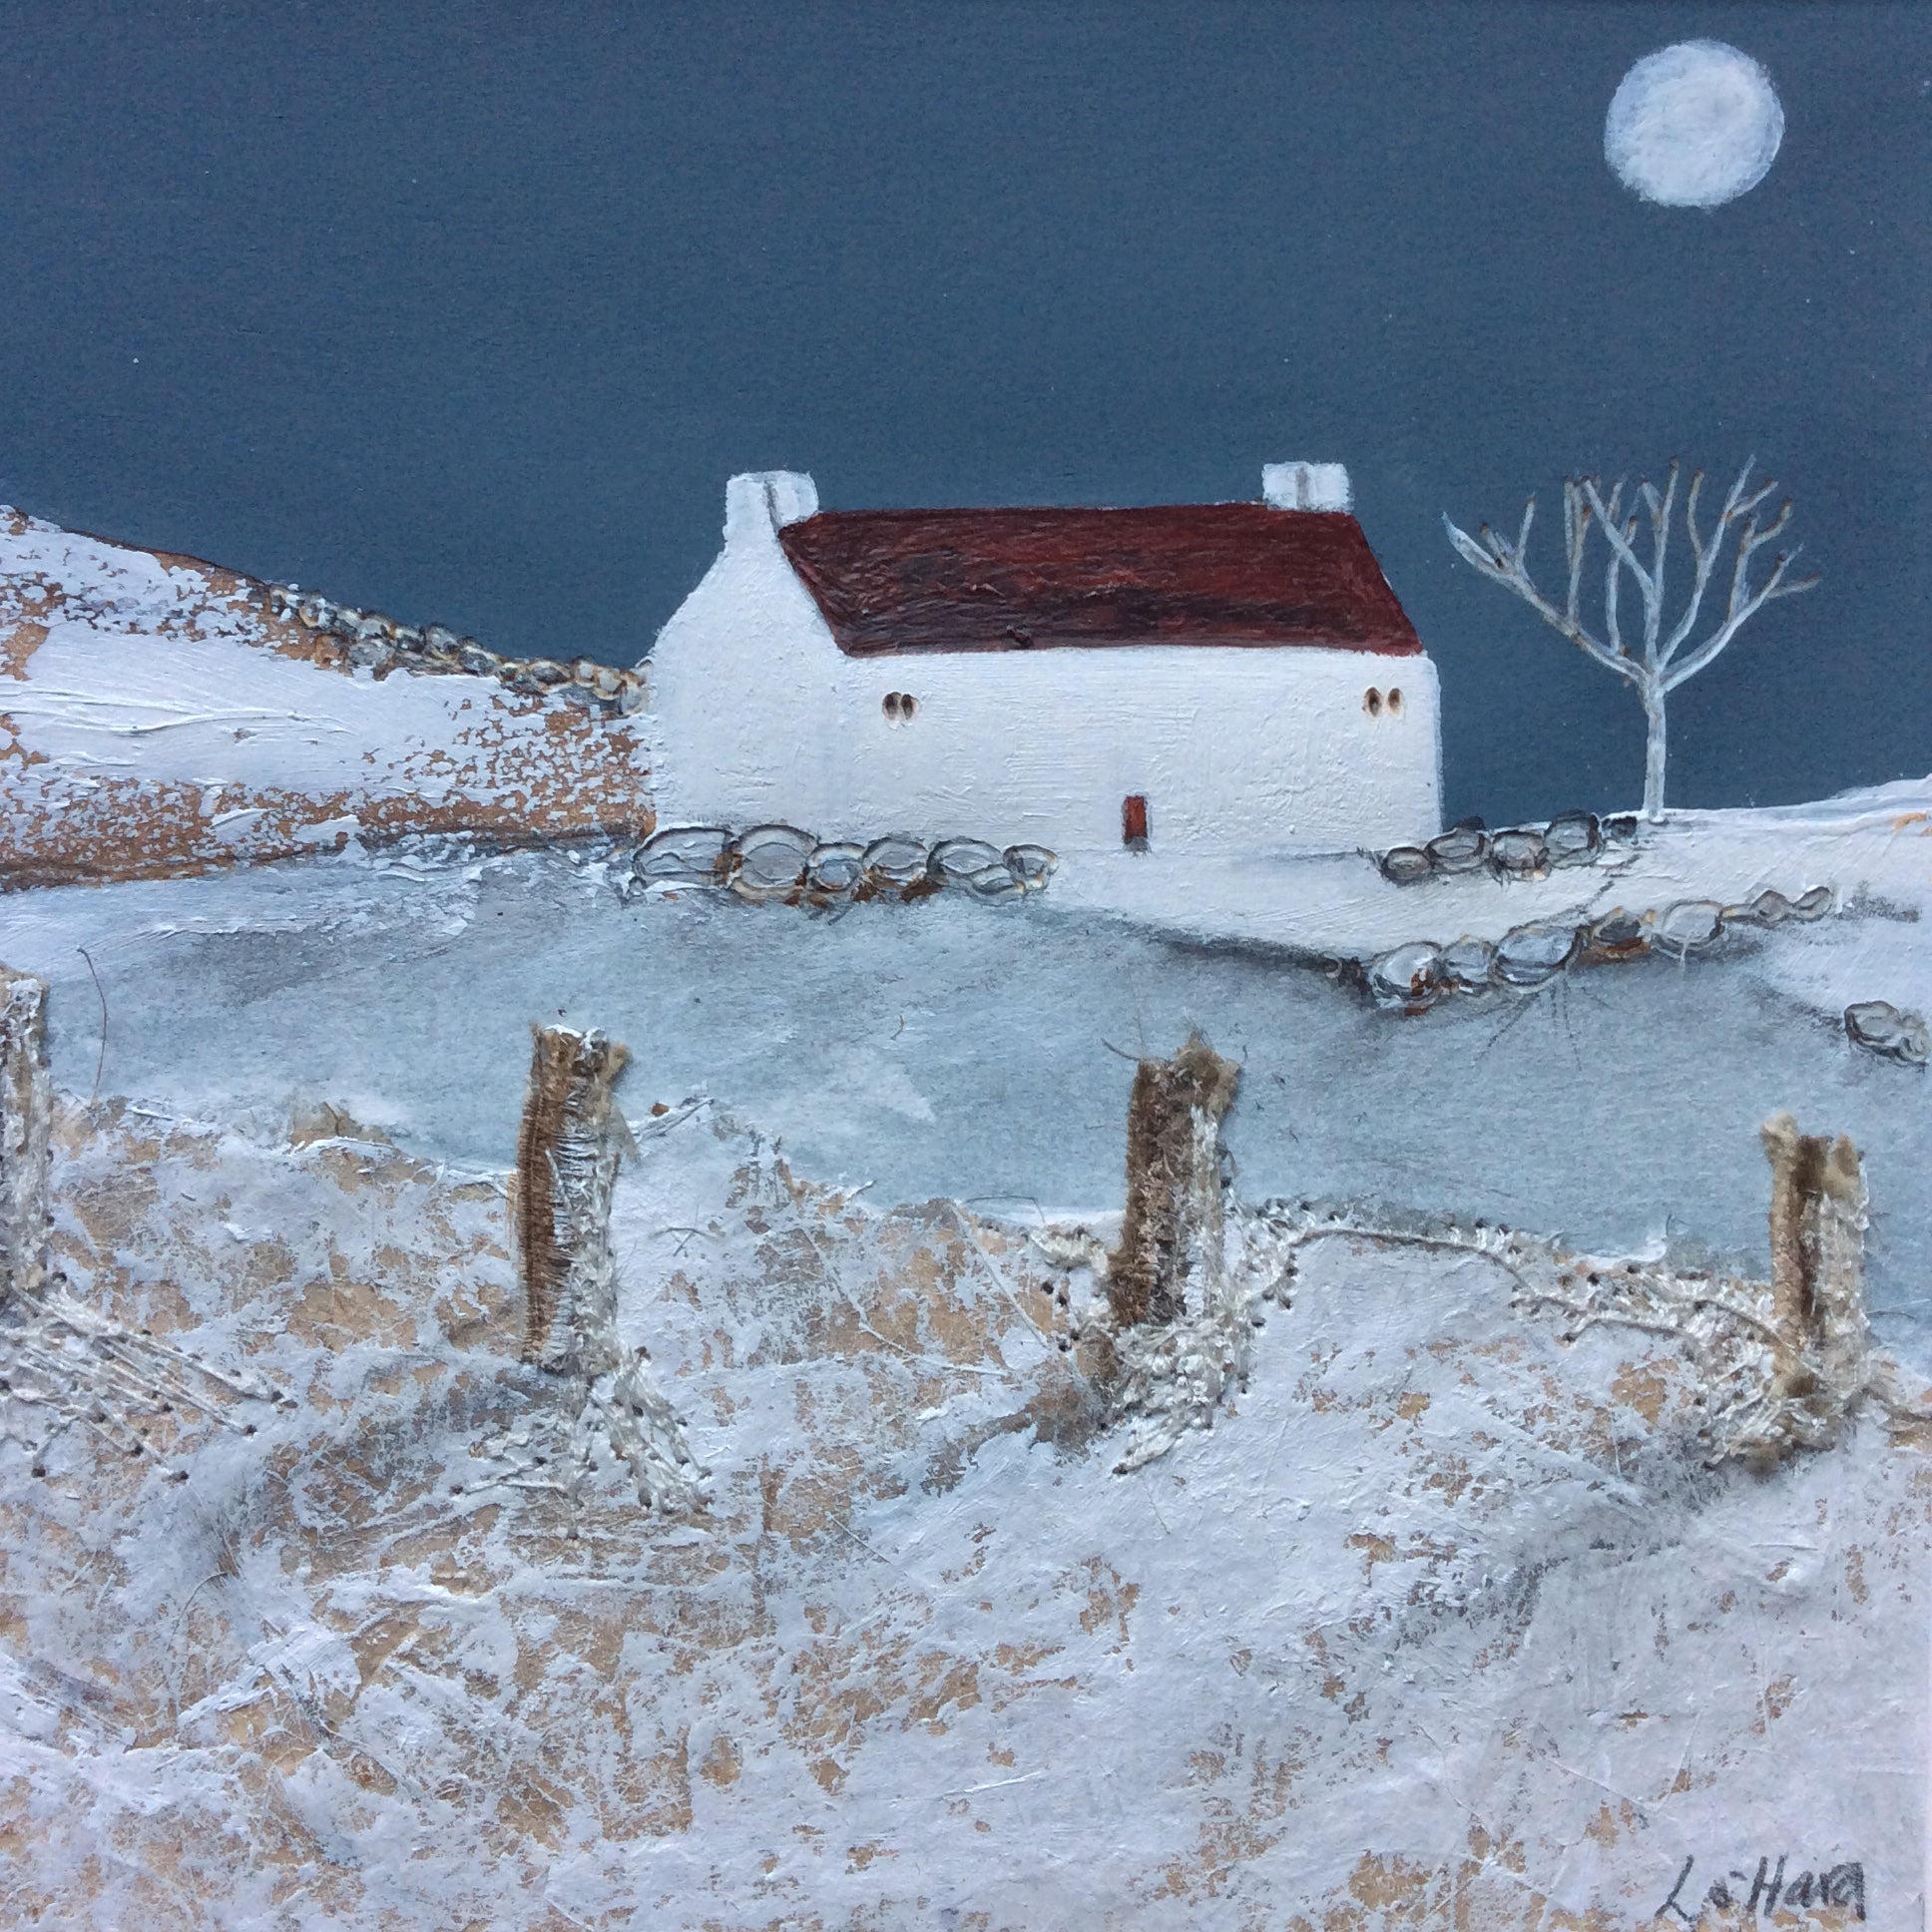 Mixed Media Art By Louise O'Hara - "A moonlit chill”